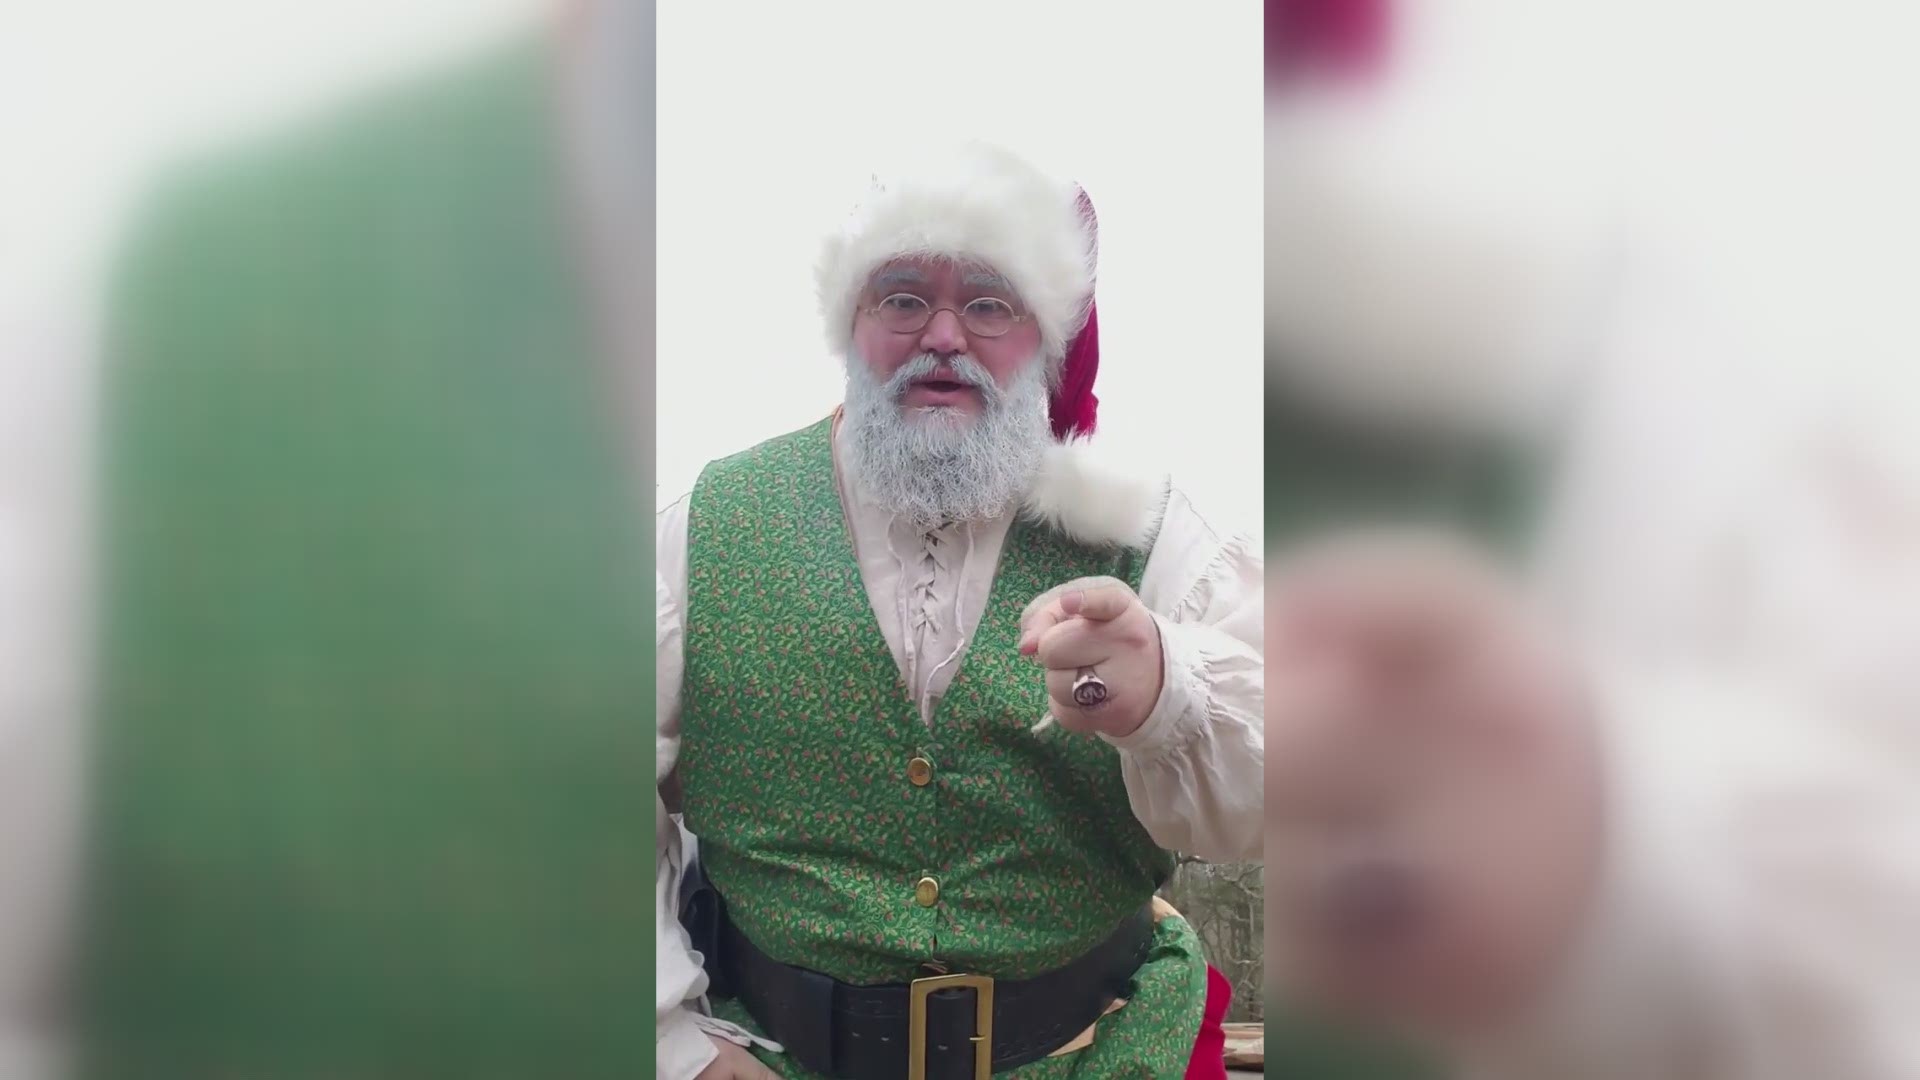 After making videos for his friends' children, Jarod Mills decided to share a video of him signing on Facebook - so everyone could get a message from St. Nick.